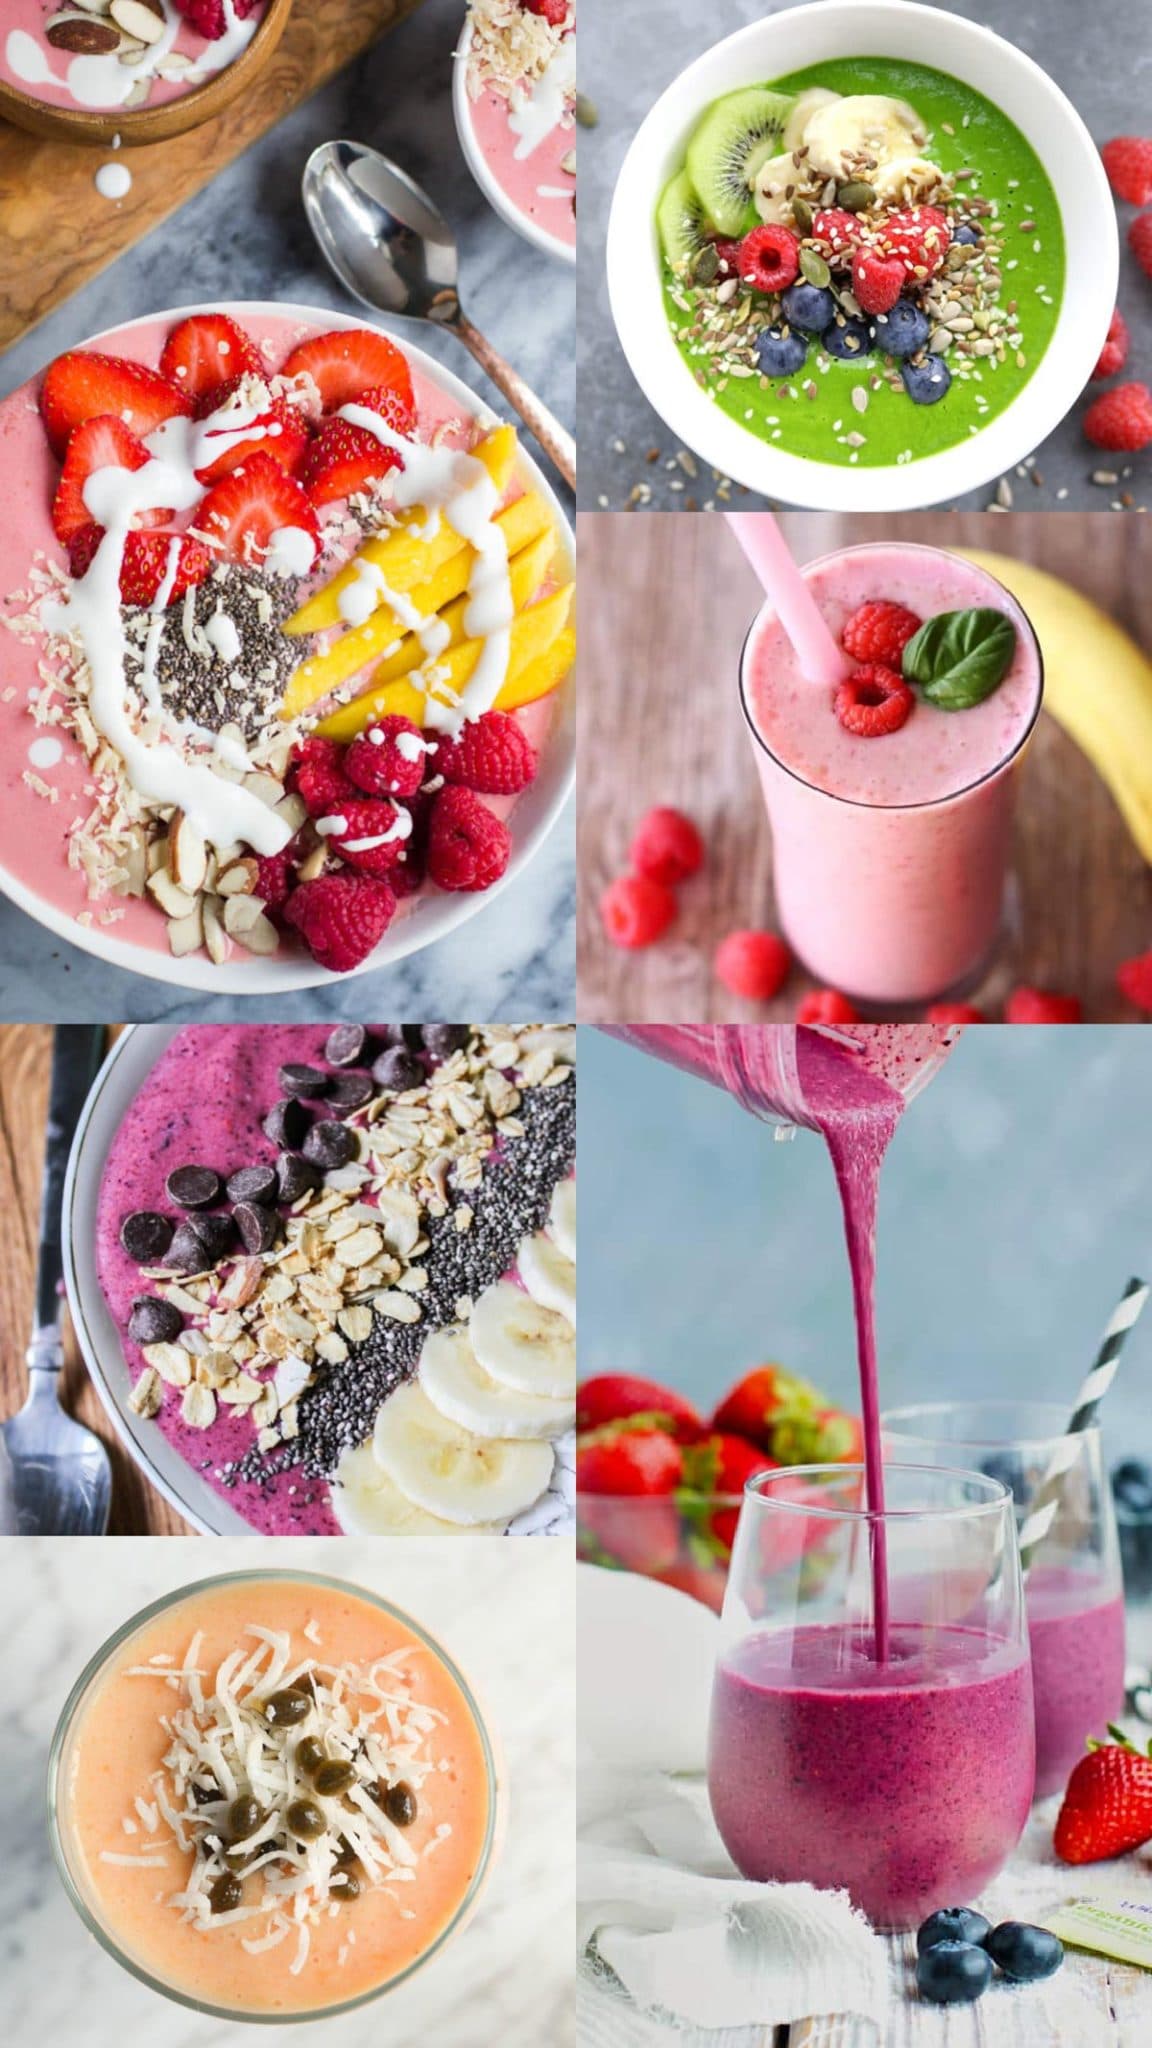 21 Of The Best Berry Smoothie Recipes - Recipes Worth Repeating